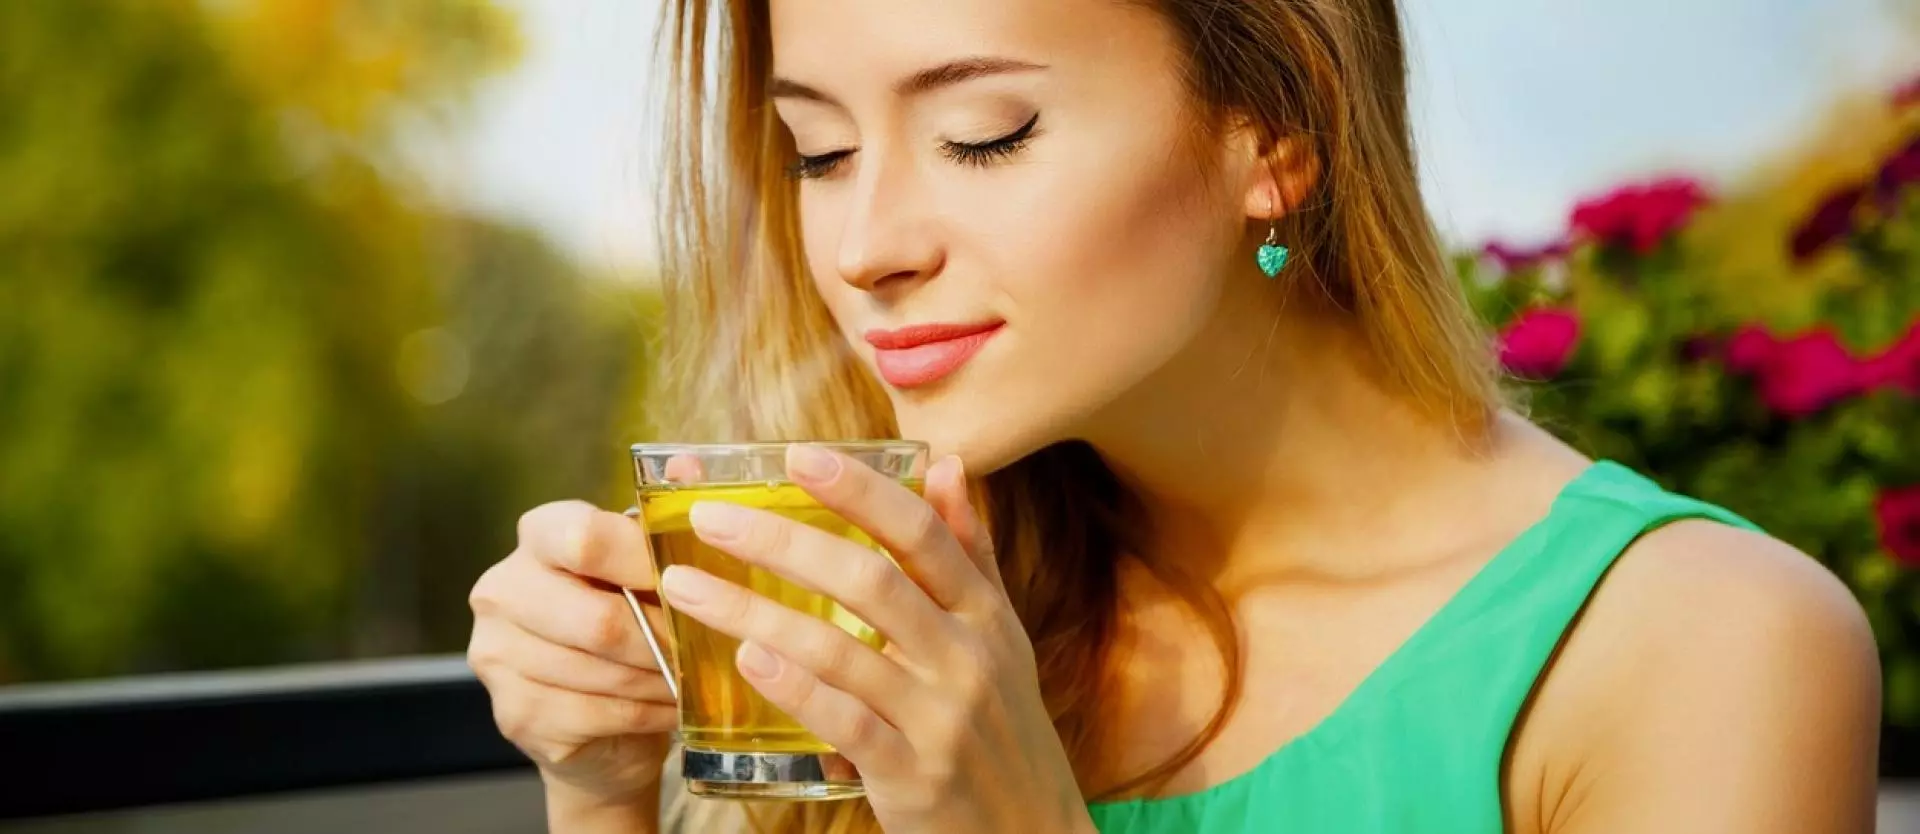 How Does Green Tea Benefit Hair and Skin Health?